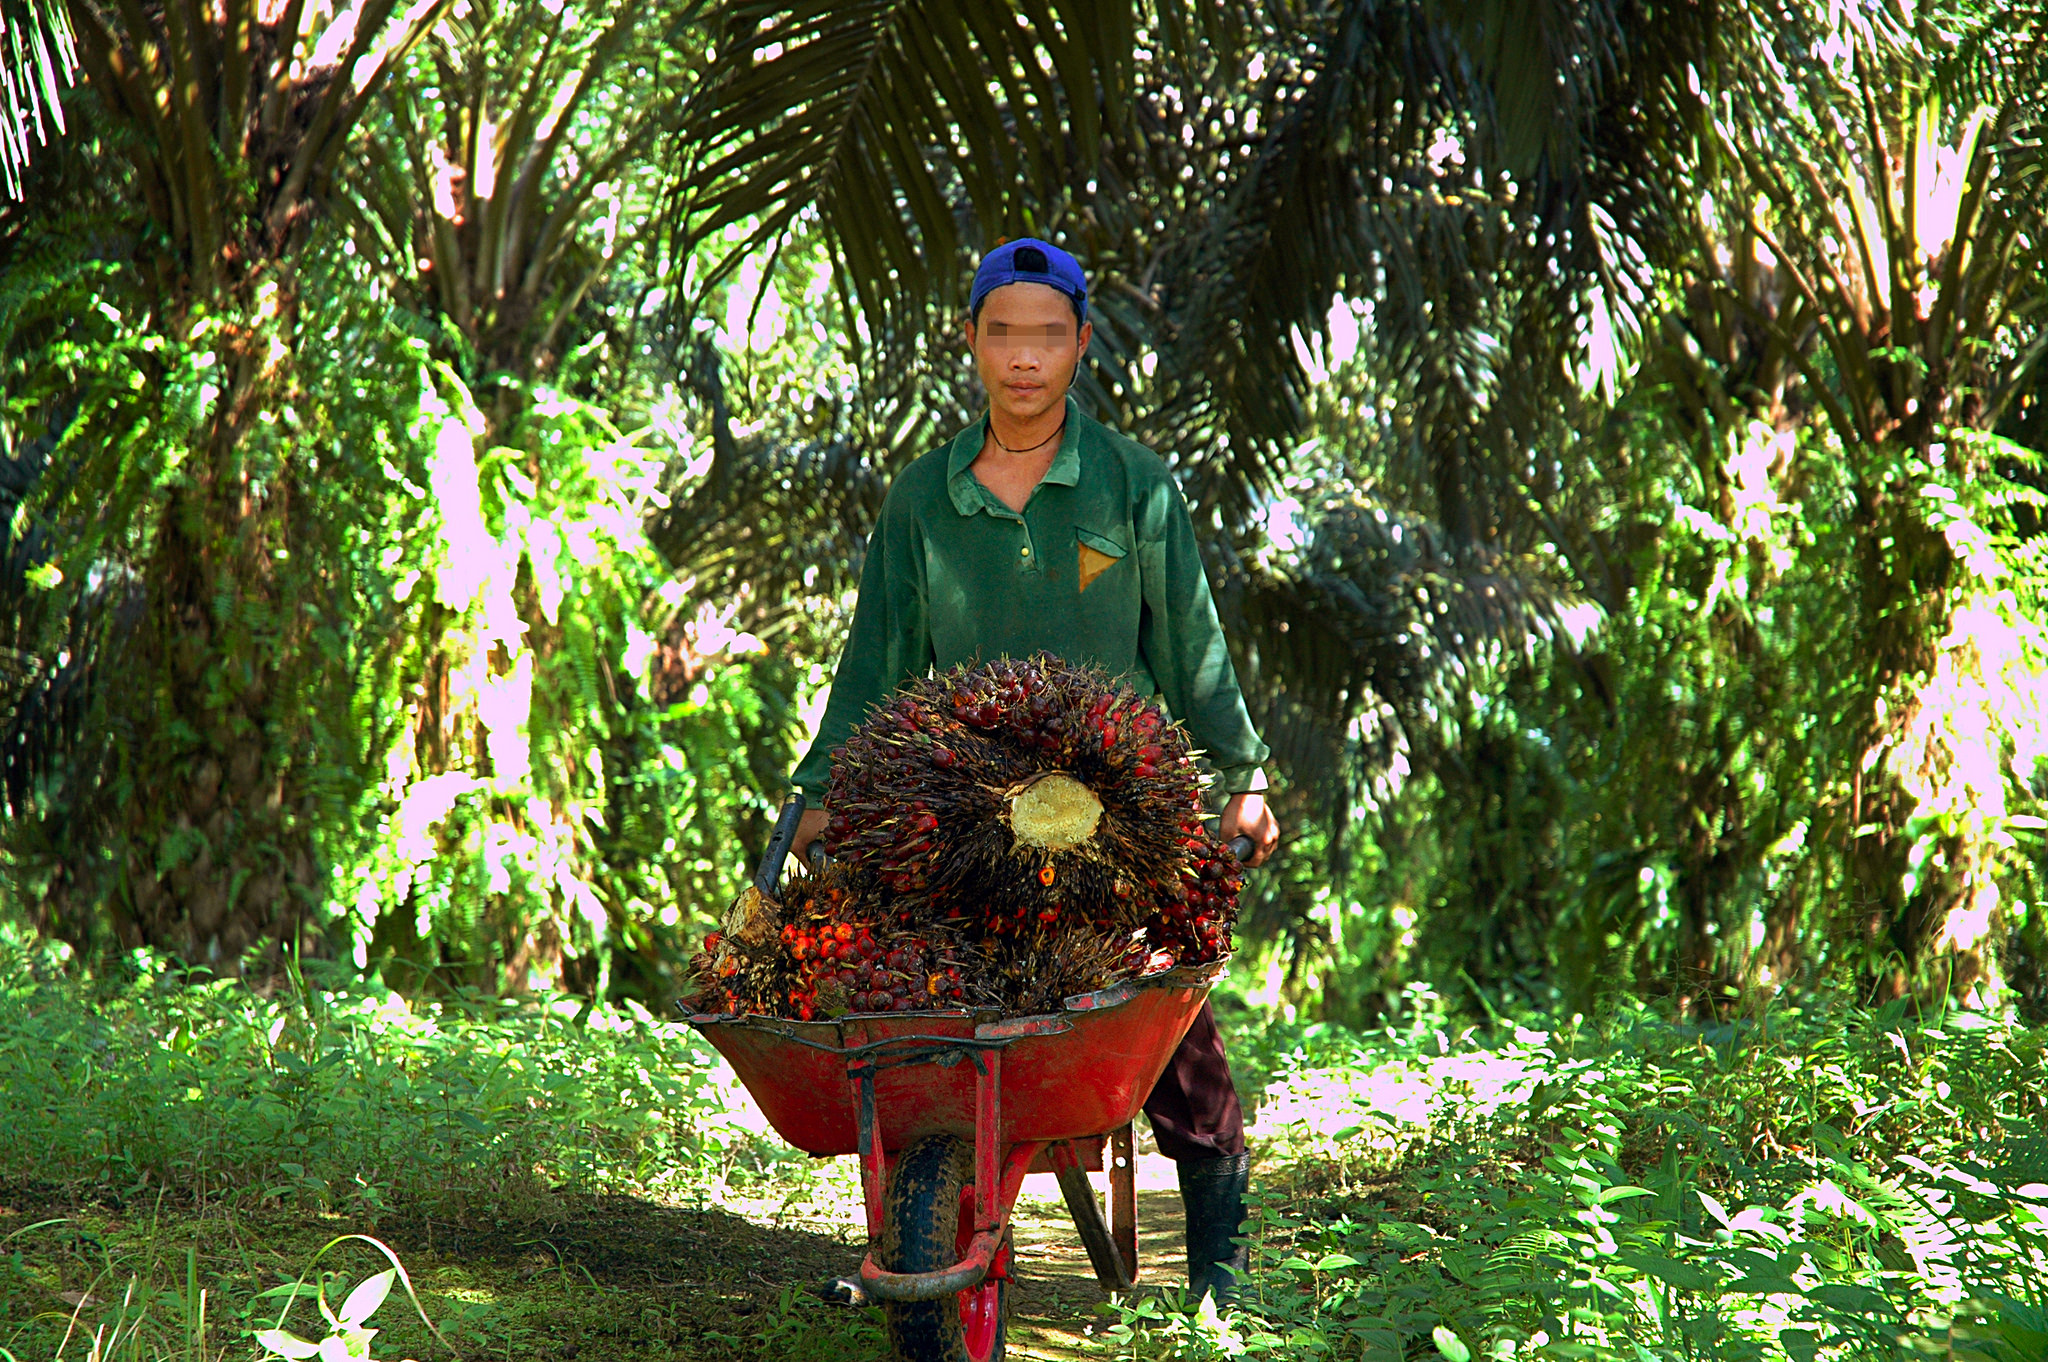 A child worker pushes a wheelbarrow of harvest along in an oil palm plantation.